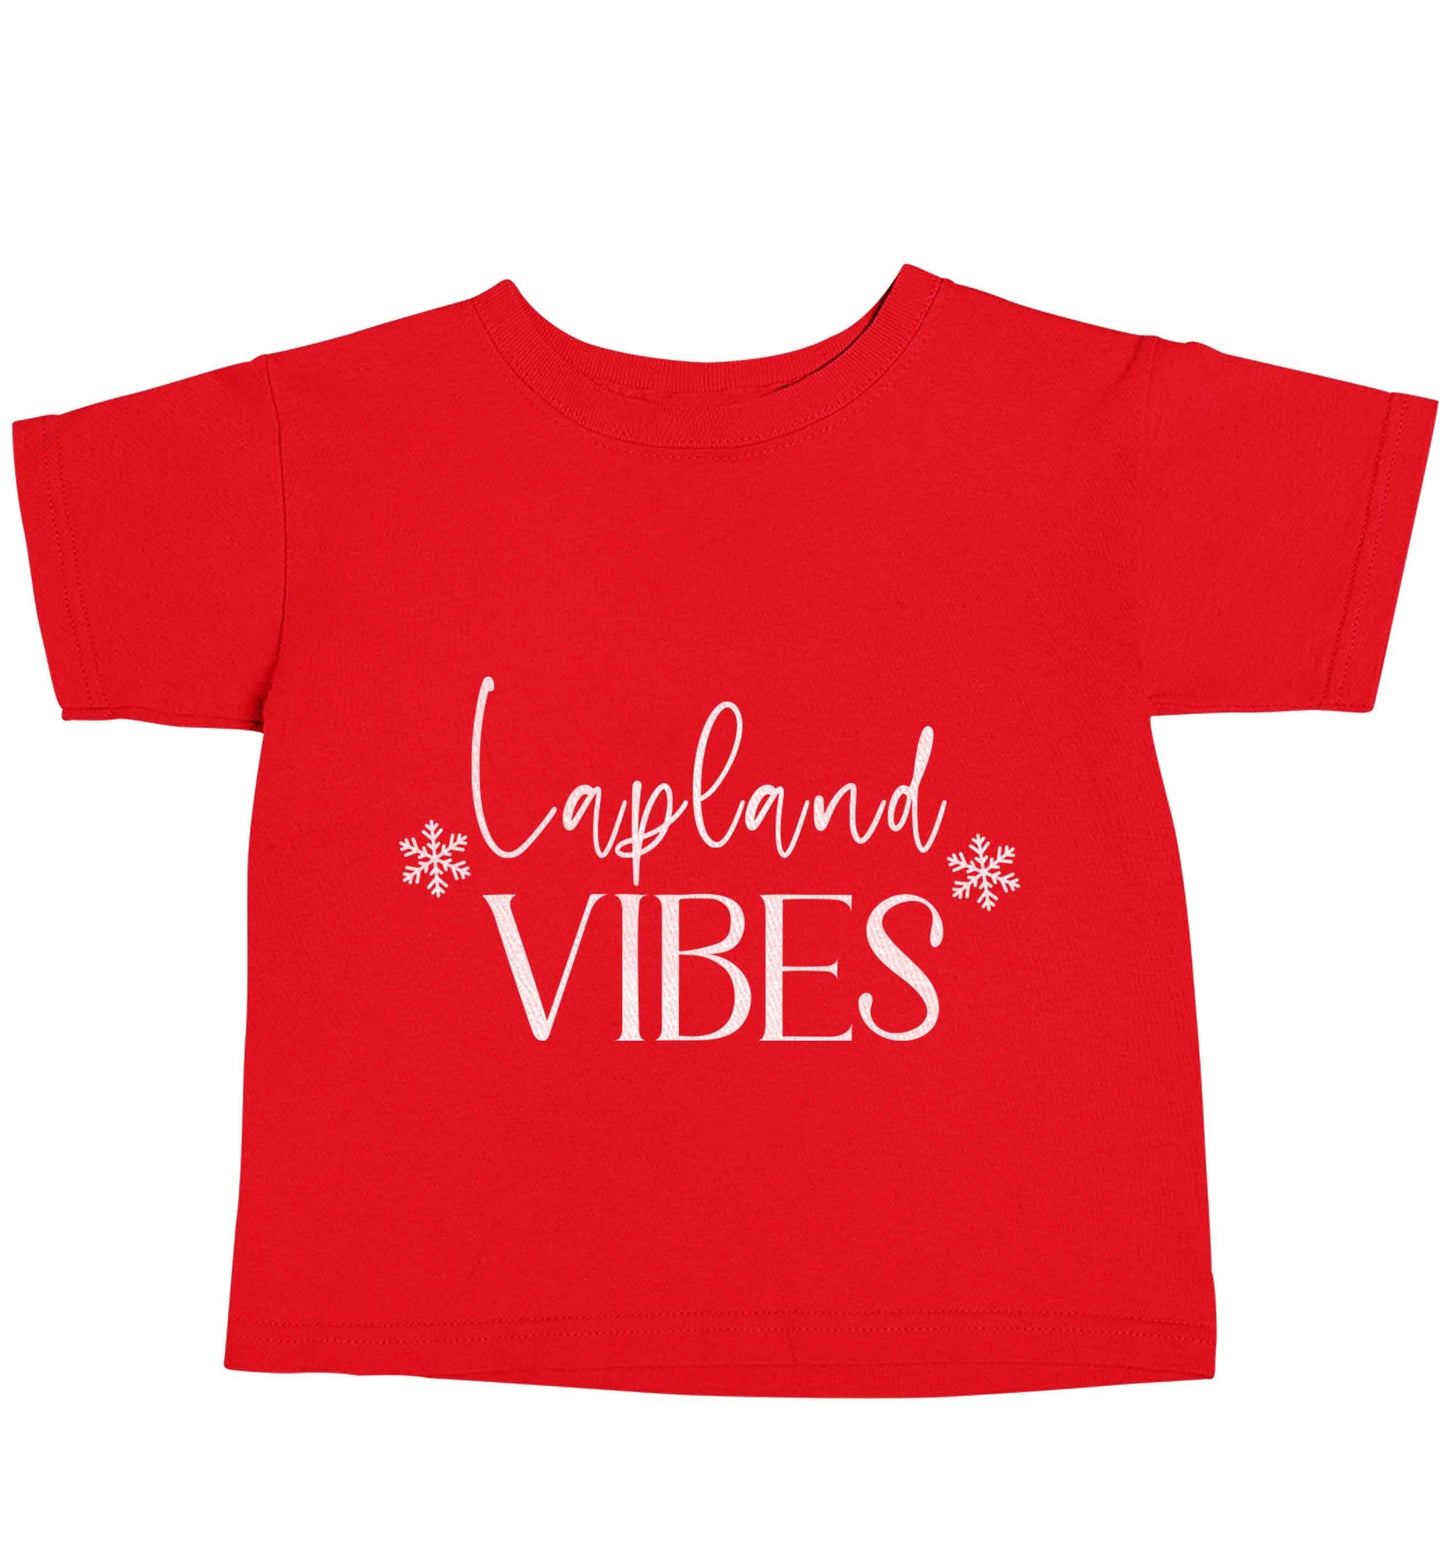 Lapland vibes red baby toddler Tshirt 2 Years